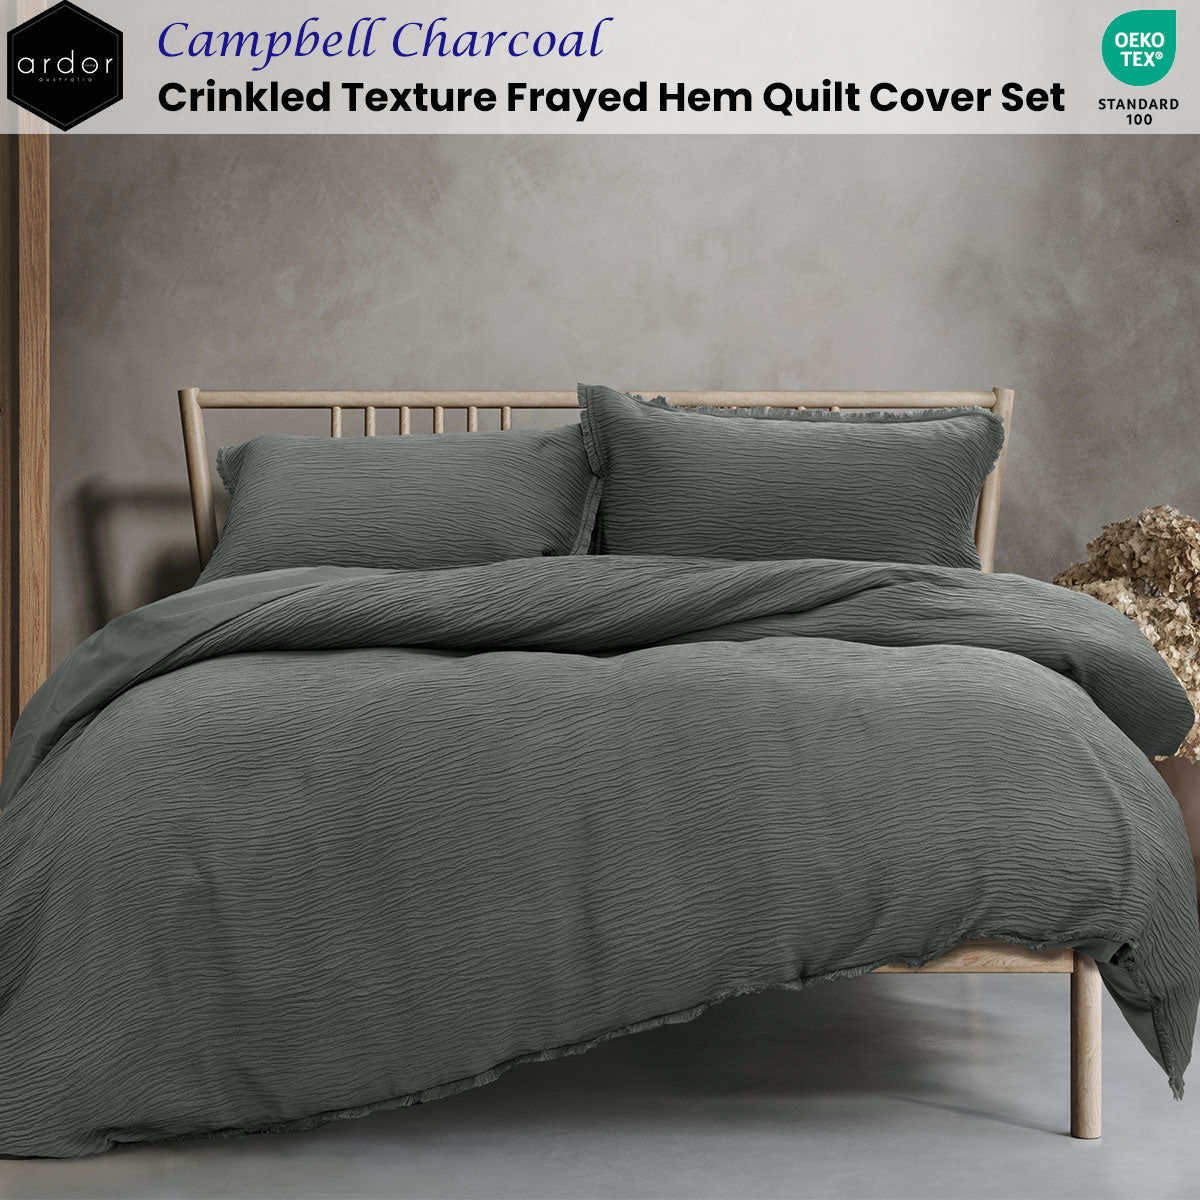 Ardor Campbell Charcoal Crinkled Texture Quilt Cover Set Queen